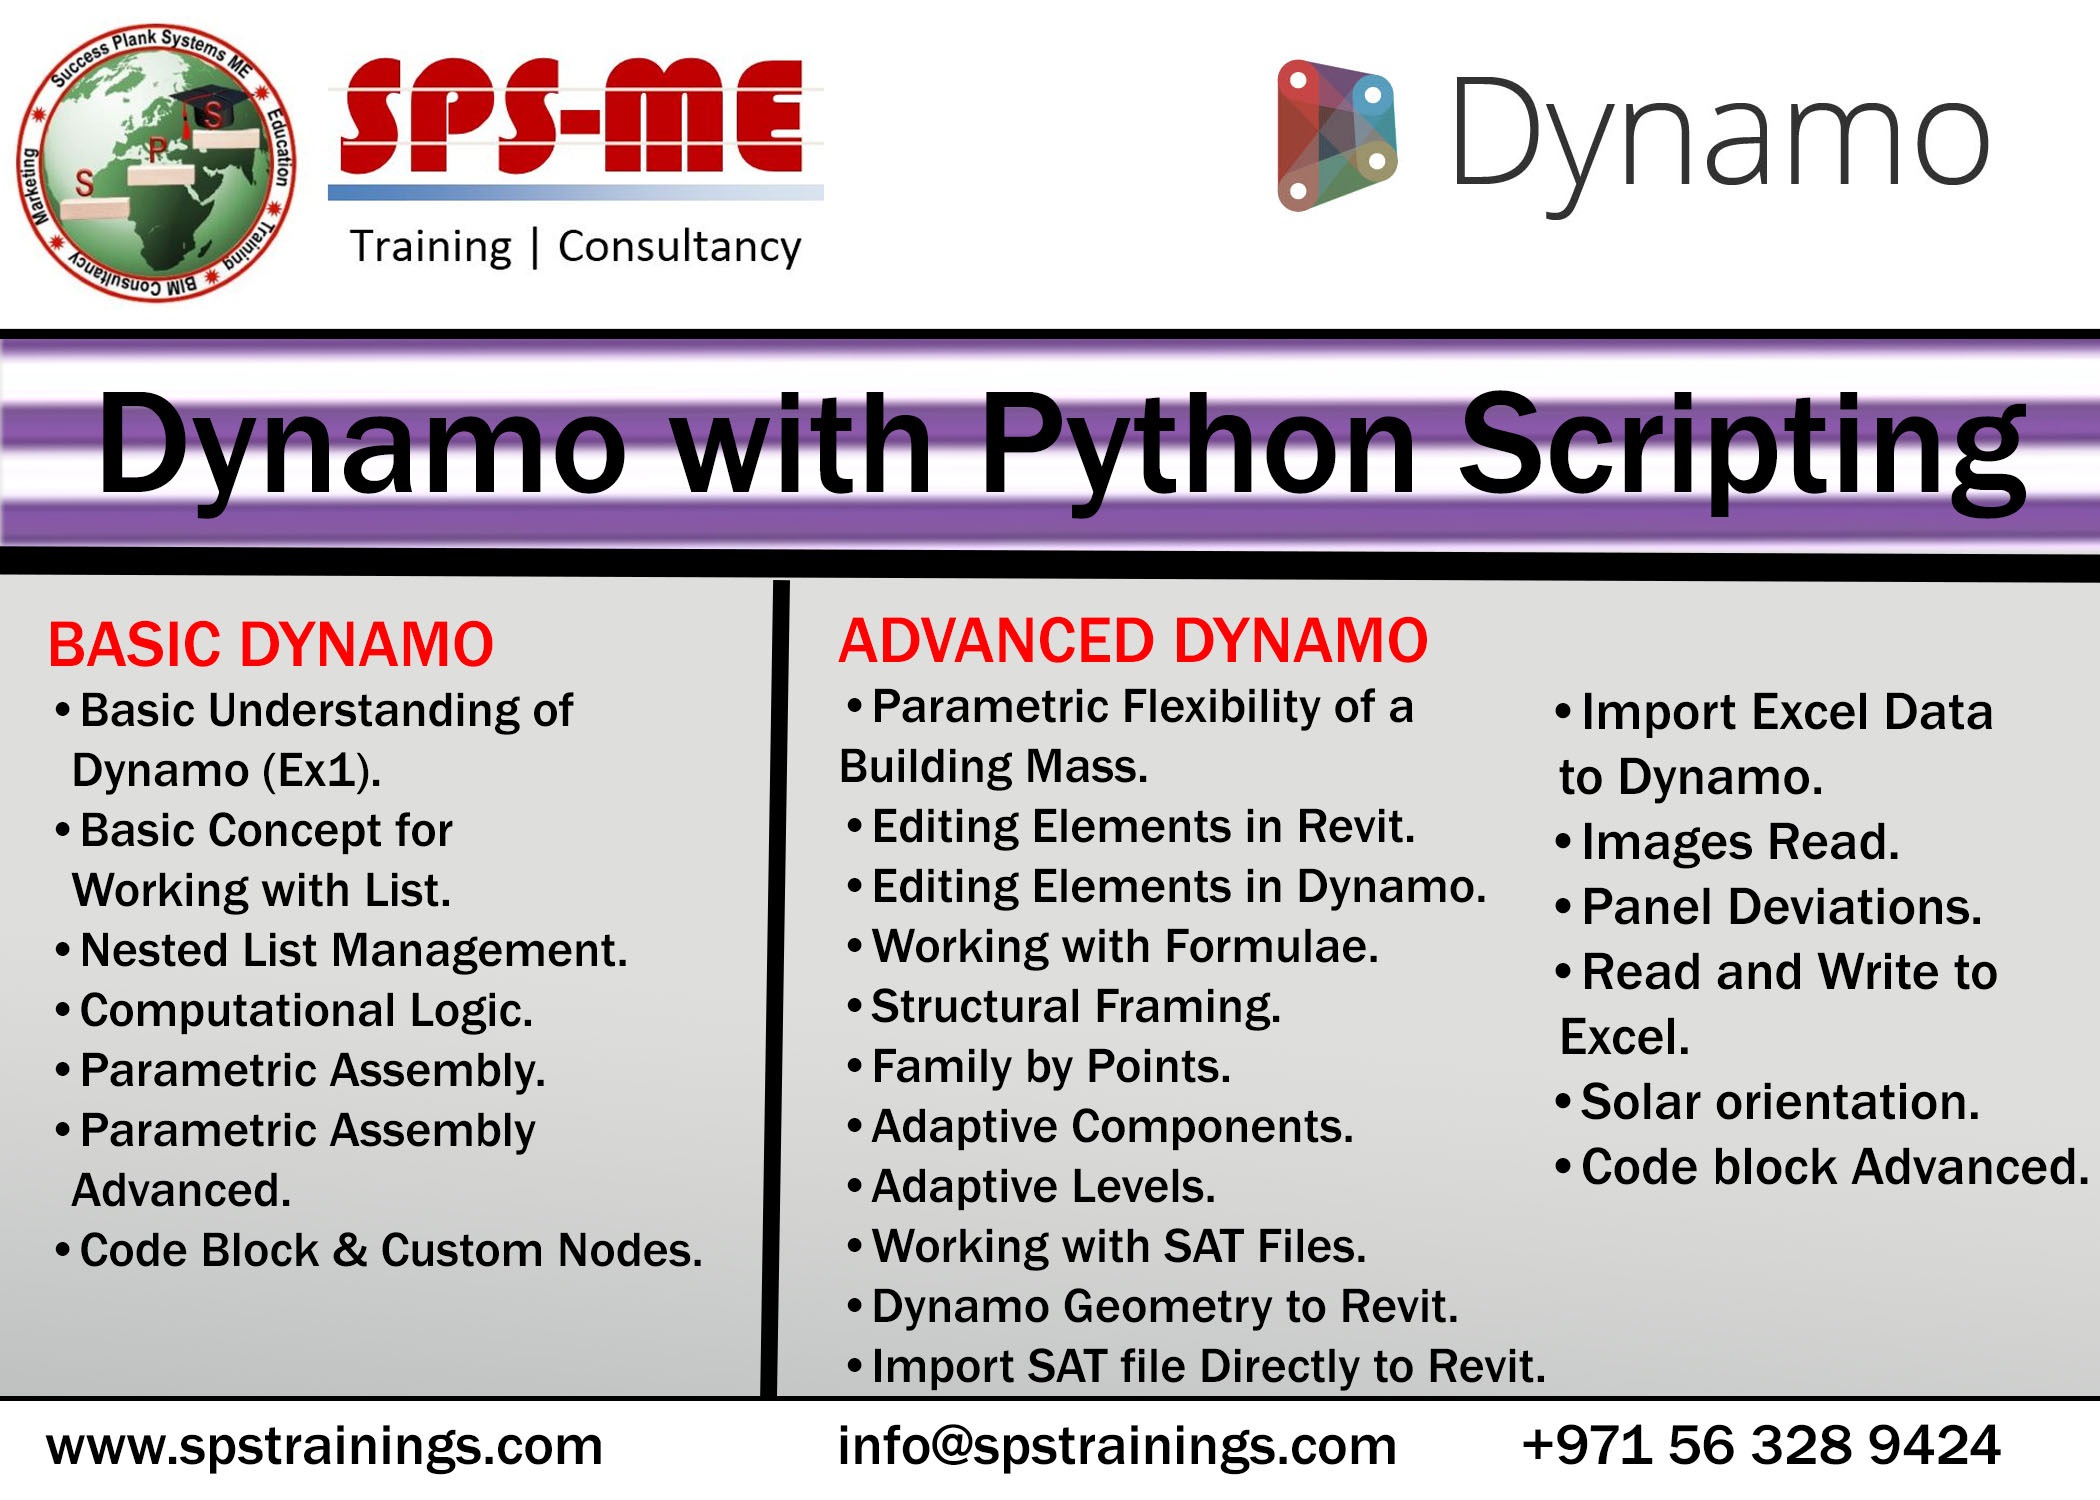 LEARN #REVIT #DYNAMO WITH #PYTHON #SCRIPT WITH EXPERT FACULTY +971563289424